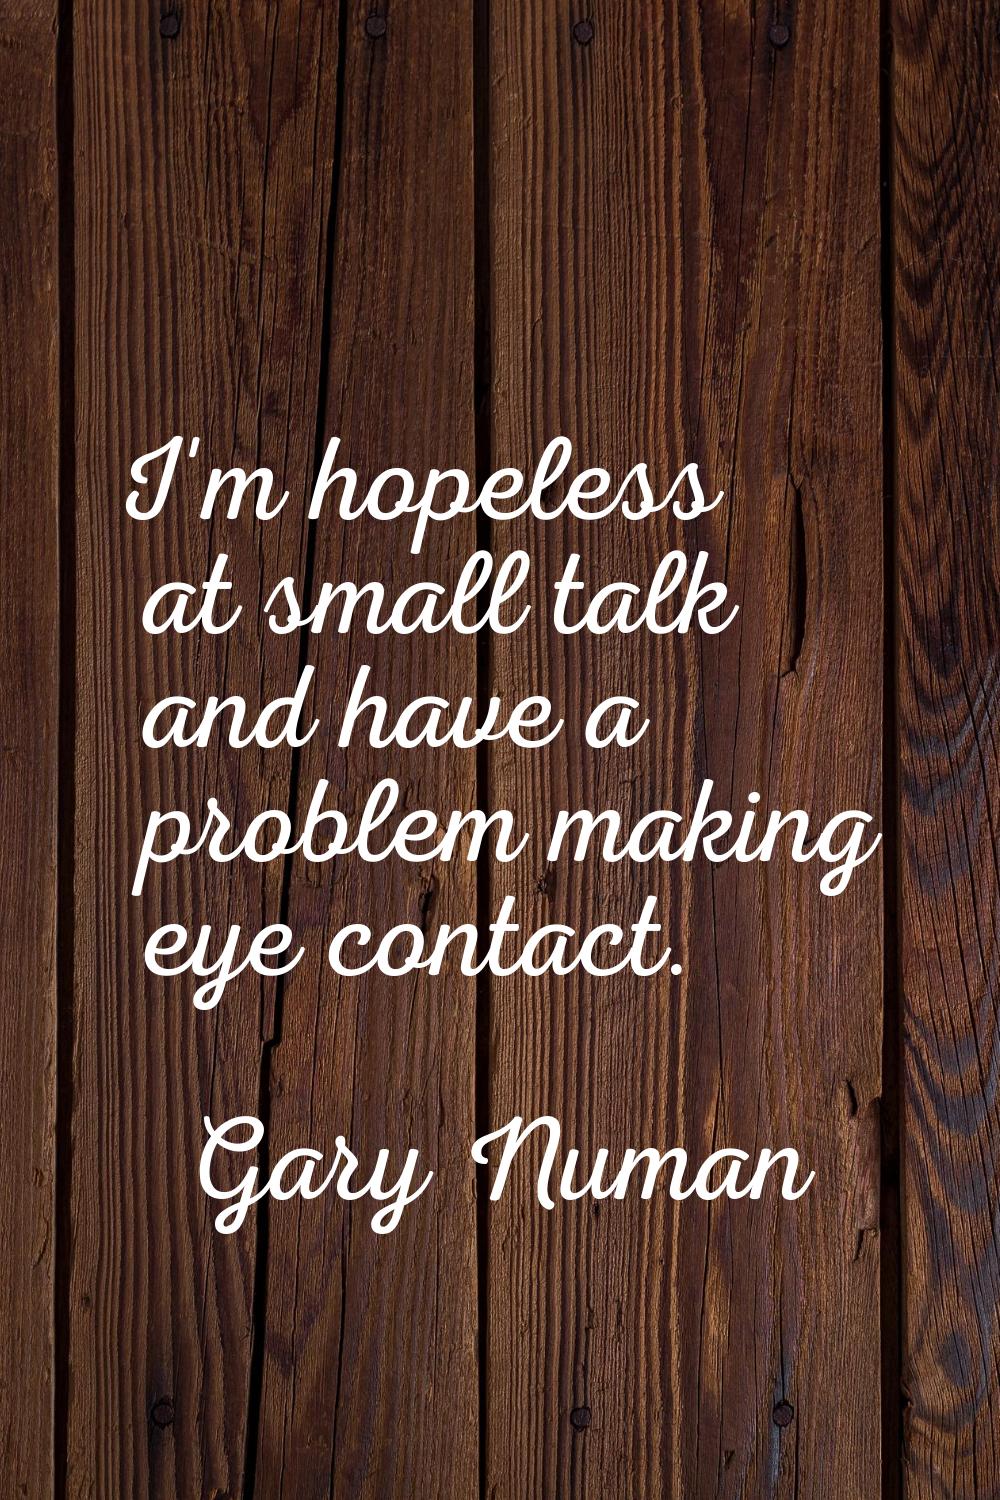 I'm hopeless at small talk and have a problem making eye contact.